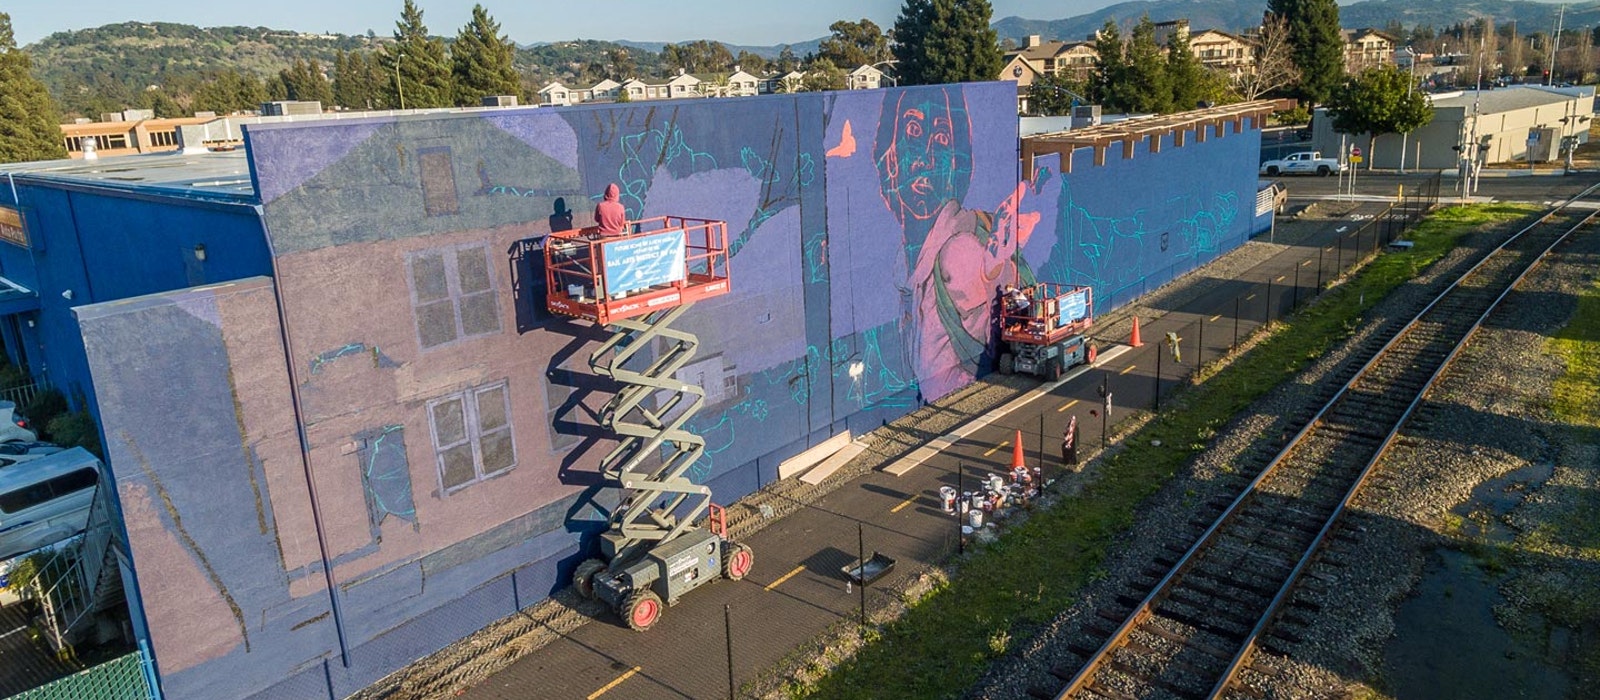 Napa arts district mural being painted.